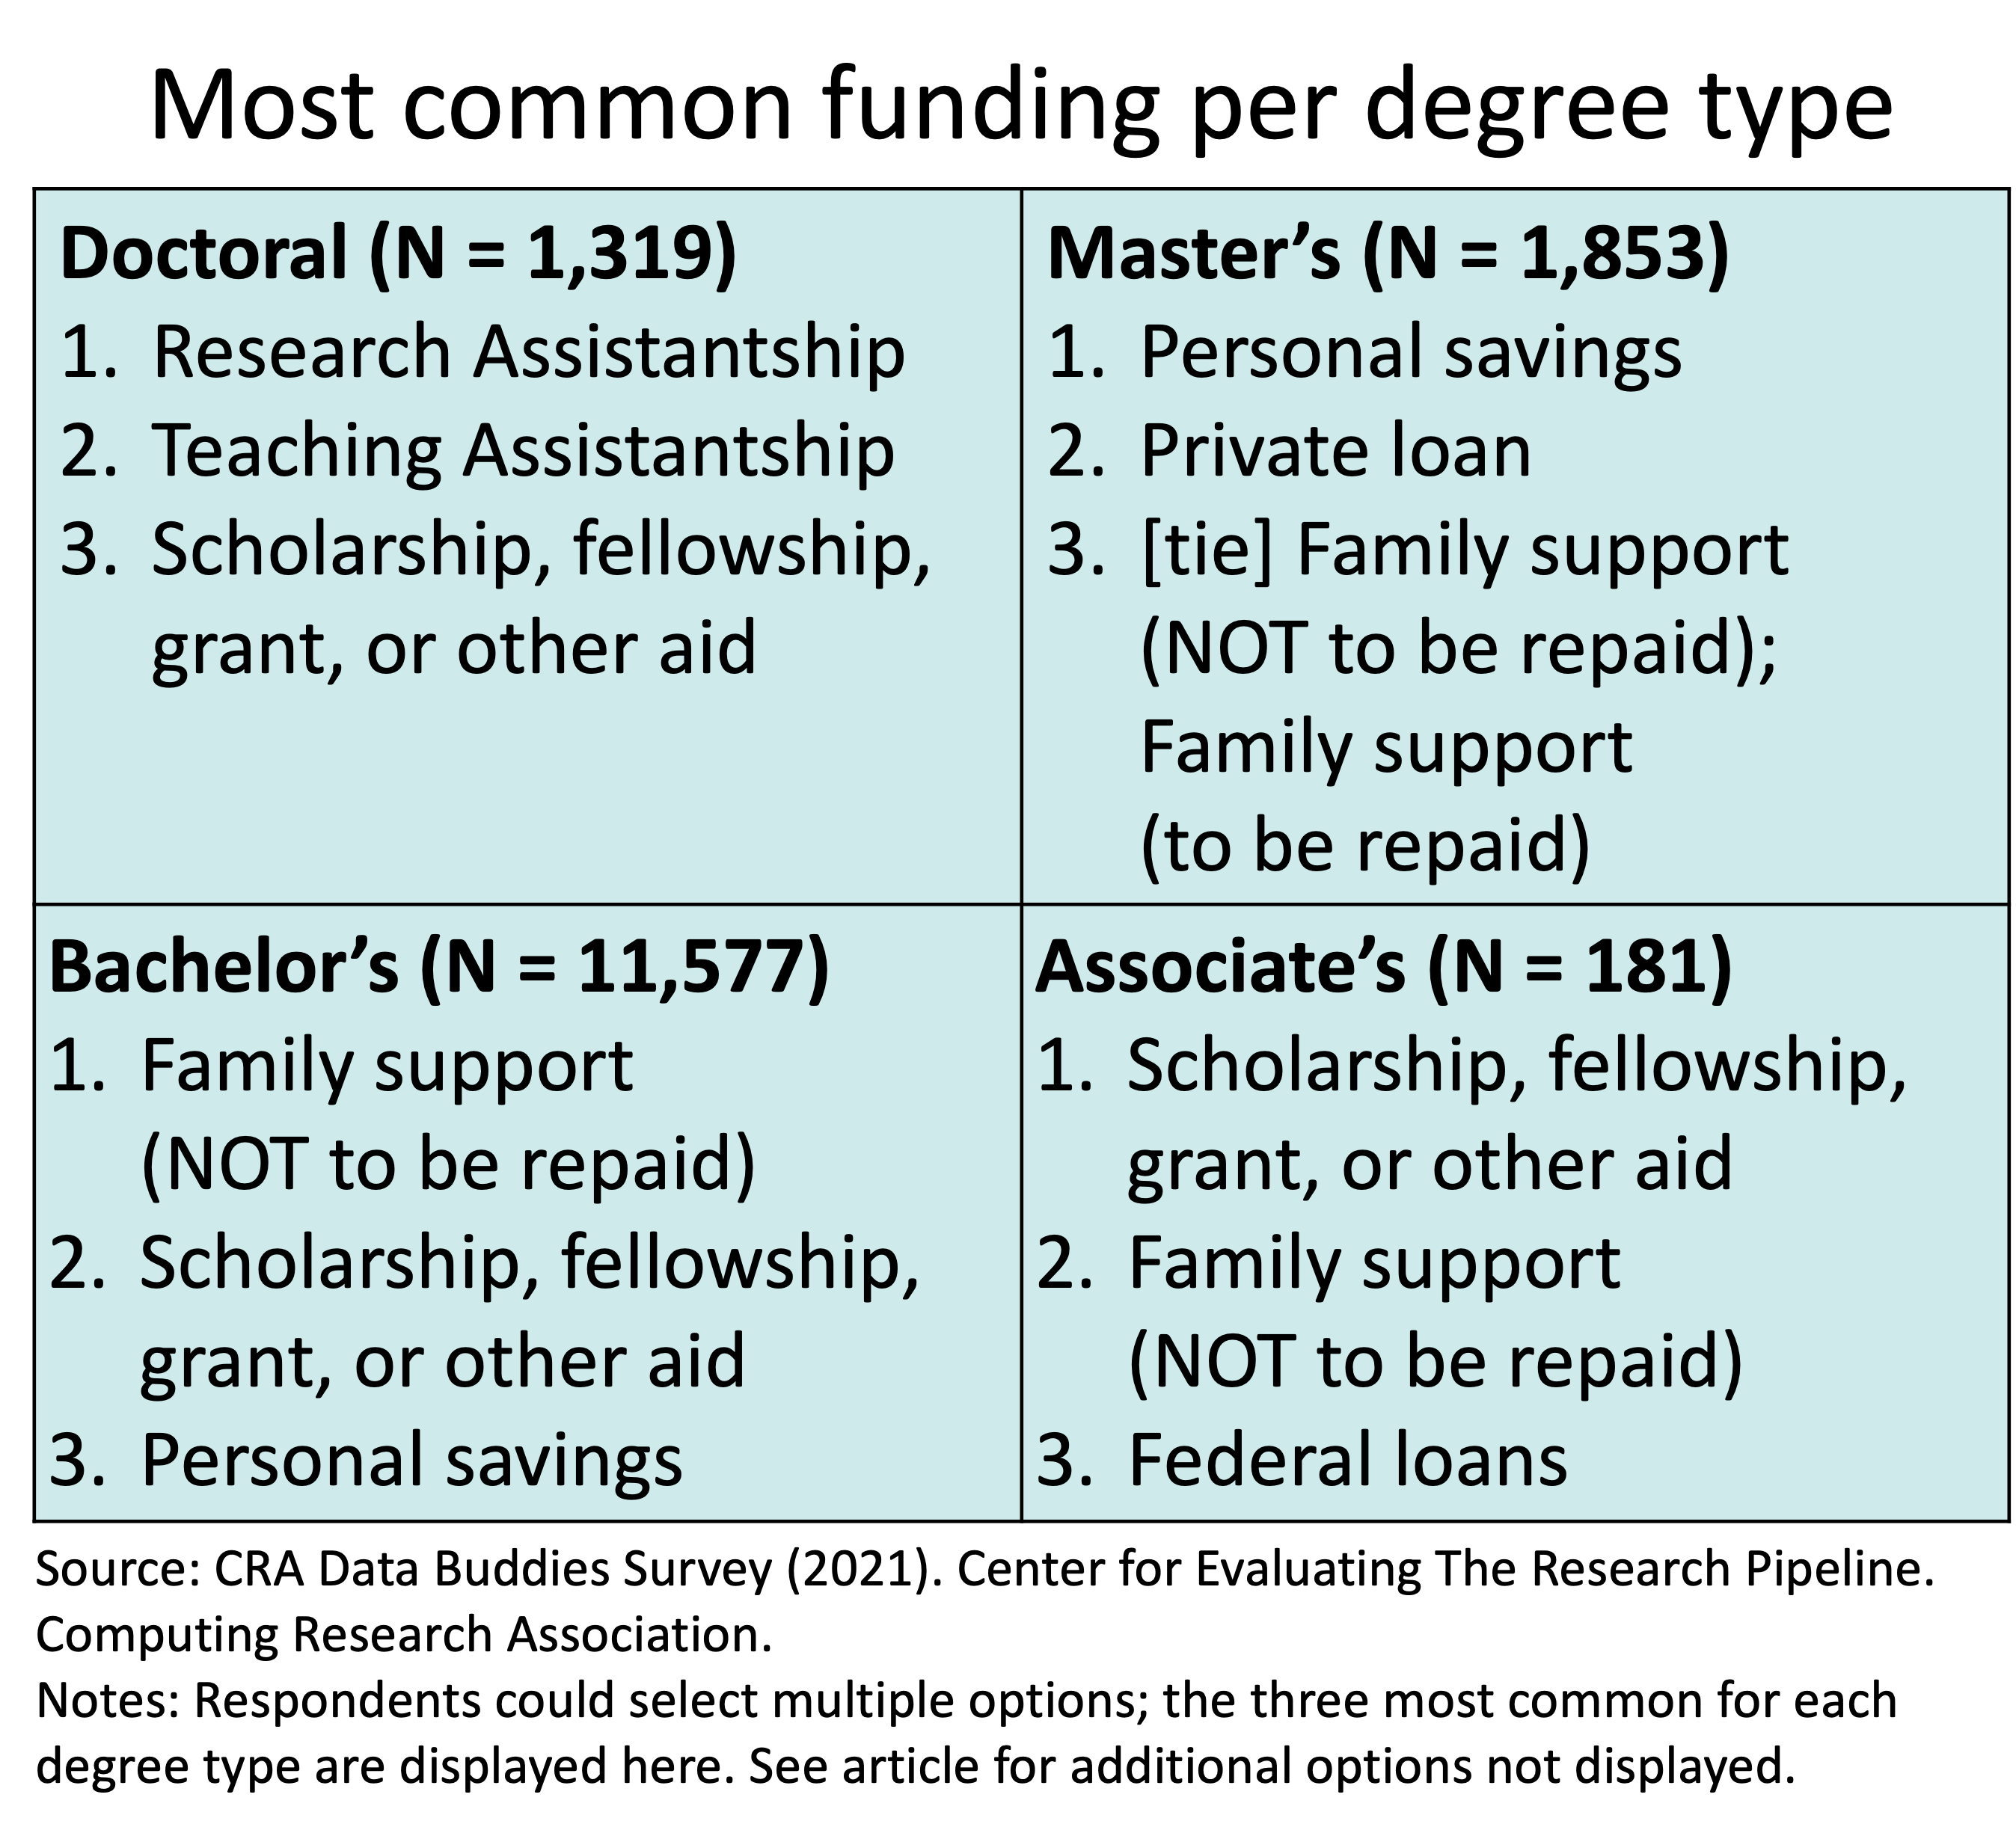 A table of the 3 most common sources of funding per degree type. Doctoral is research assistantship, teaching assistantship, and scholarship, fellowship, grant, or other aid. Master’s is personal savings, private loan, and a tie between family support to be repaid and family support not to be repaid. Bachelor’s is family support not to be repaid, scholarship, fellowship, grant, or other aid, and personal savings. Associate’s is scholarship, fellowship, grant, or other aid, family support not to be repaid, and federal loans.”